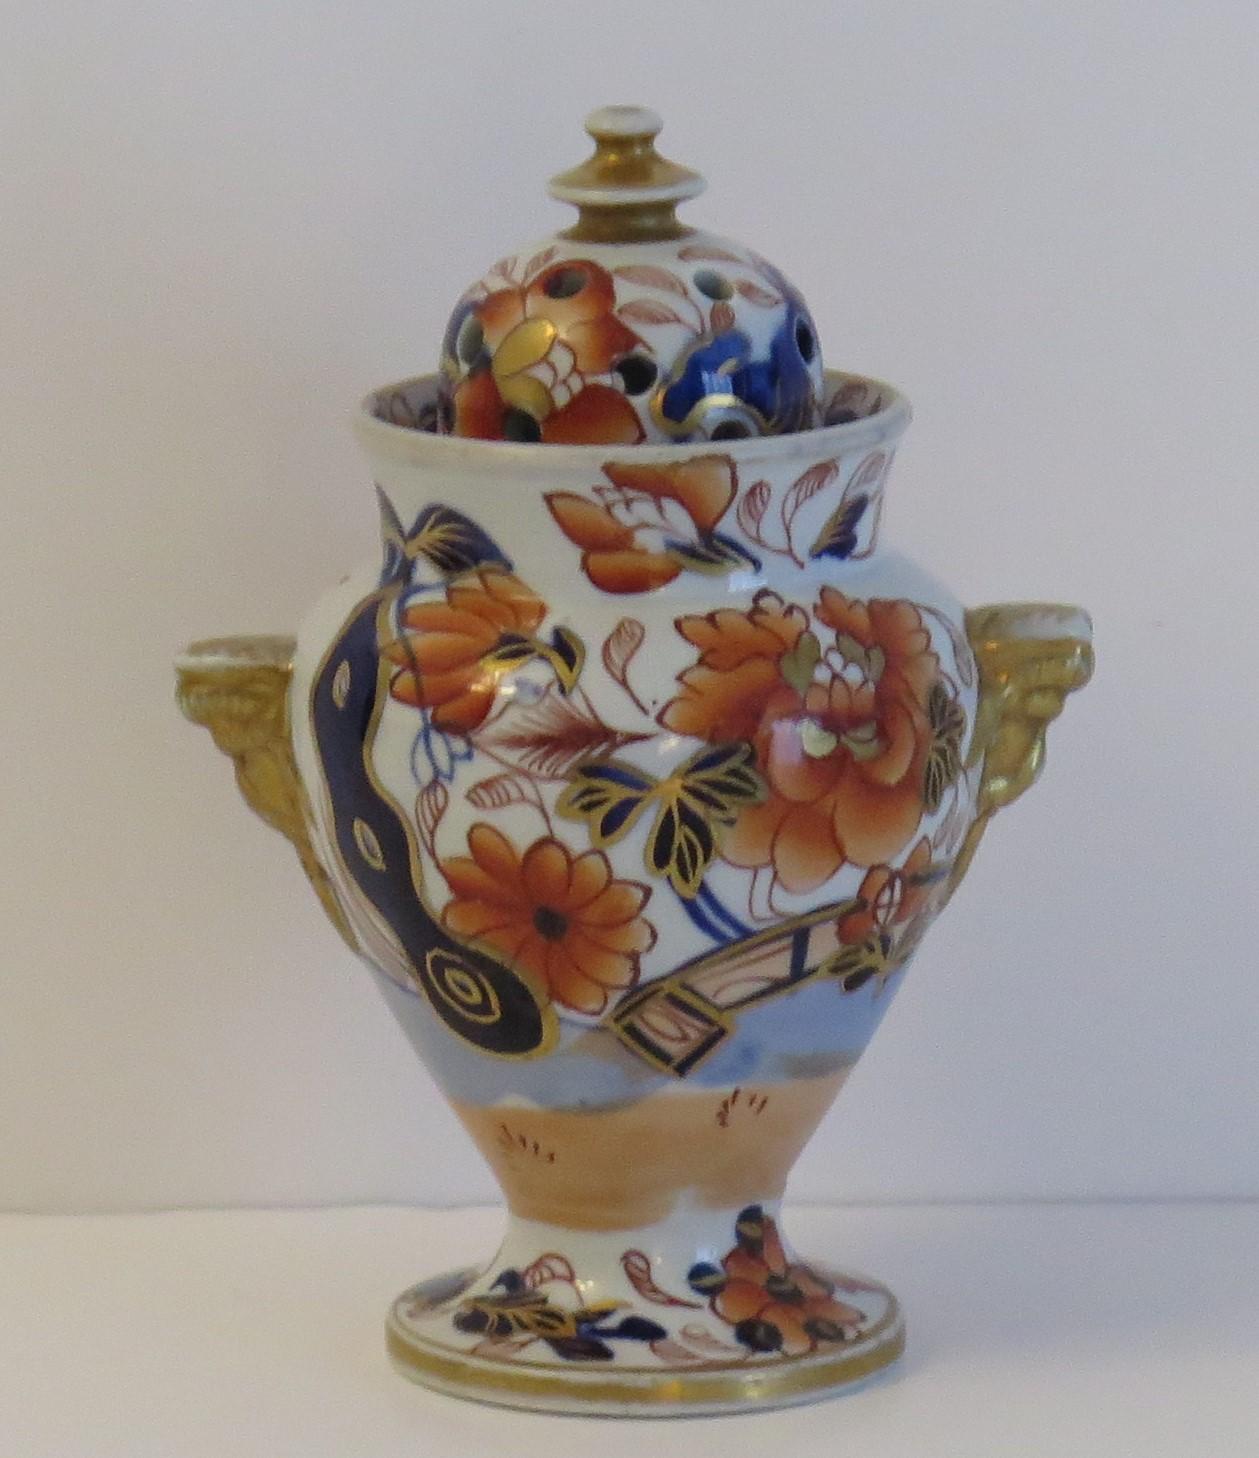 This is a rare shaped ironstone lidded vase, forming a Pot Pourri vase, in the gilded and hand painted Fence Japan pattern, made by the Mason's factory in the early 19th century, circa 1817.

The vase has a good baluster profile, with two mask